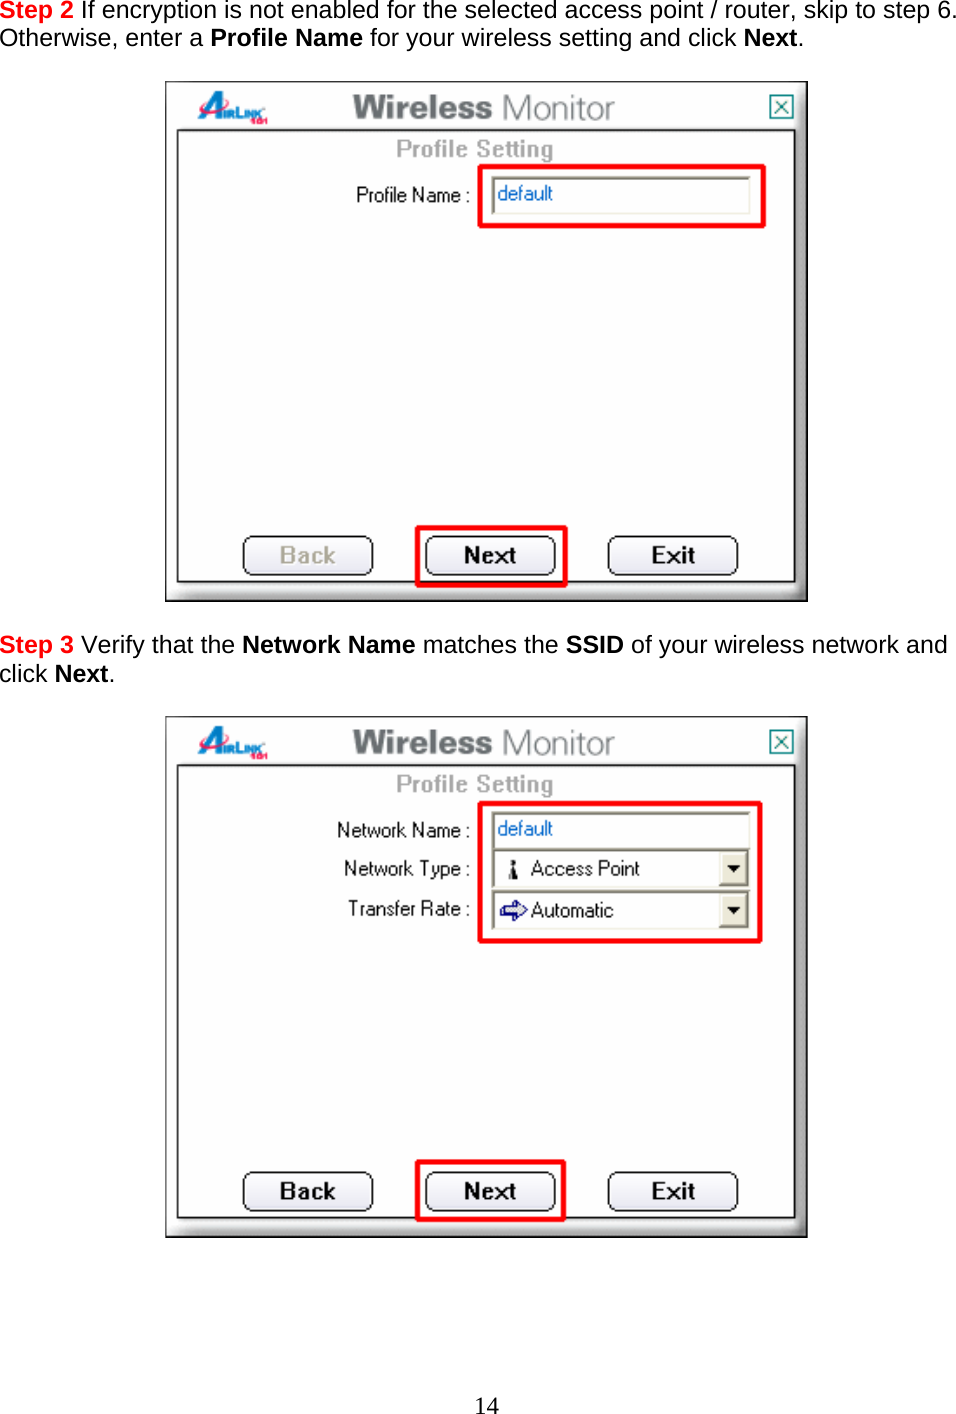 14 Step 2 If encryption is not enabled for the selected access point / router, skip to step 6. Otherwise, enter a Profile Name for your wireless setting and click Next.    Step 3 Verify that the Network Name matches the SSID of your wireless network and click Next.      